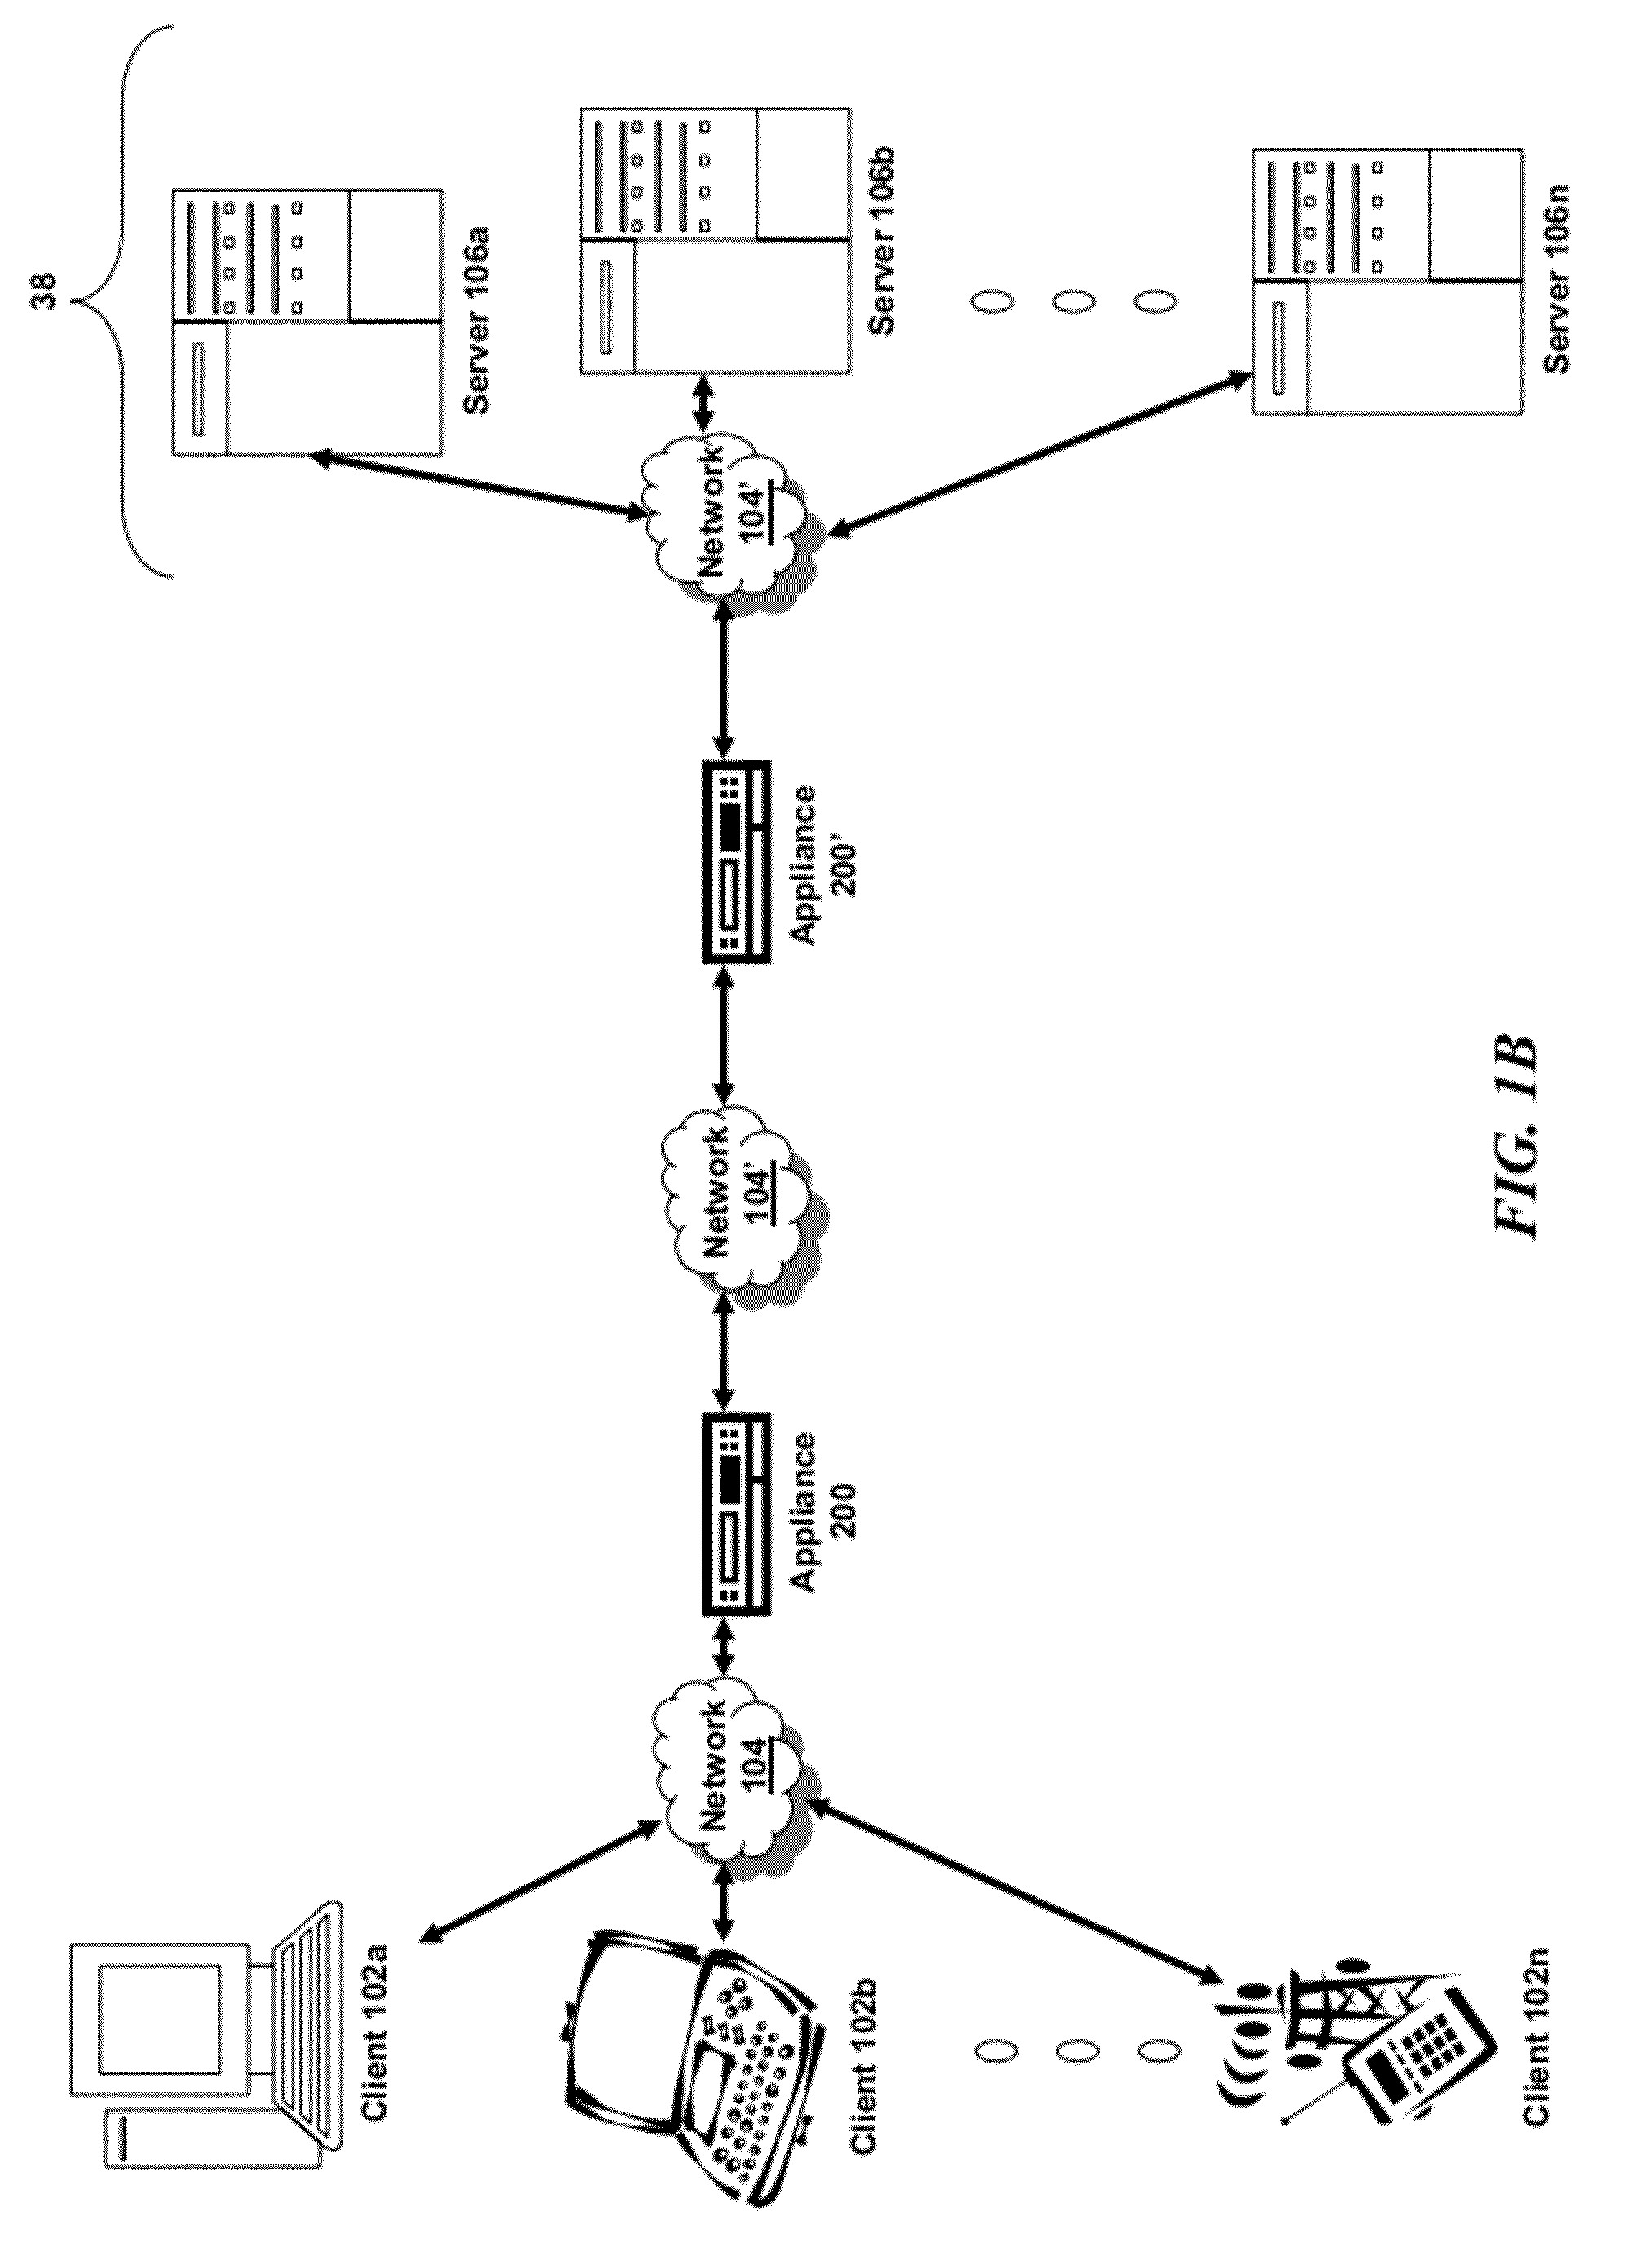 Systems and methods for SR-IOV pass-thru via an intermediary device